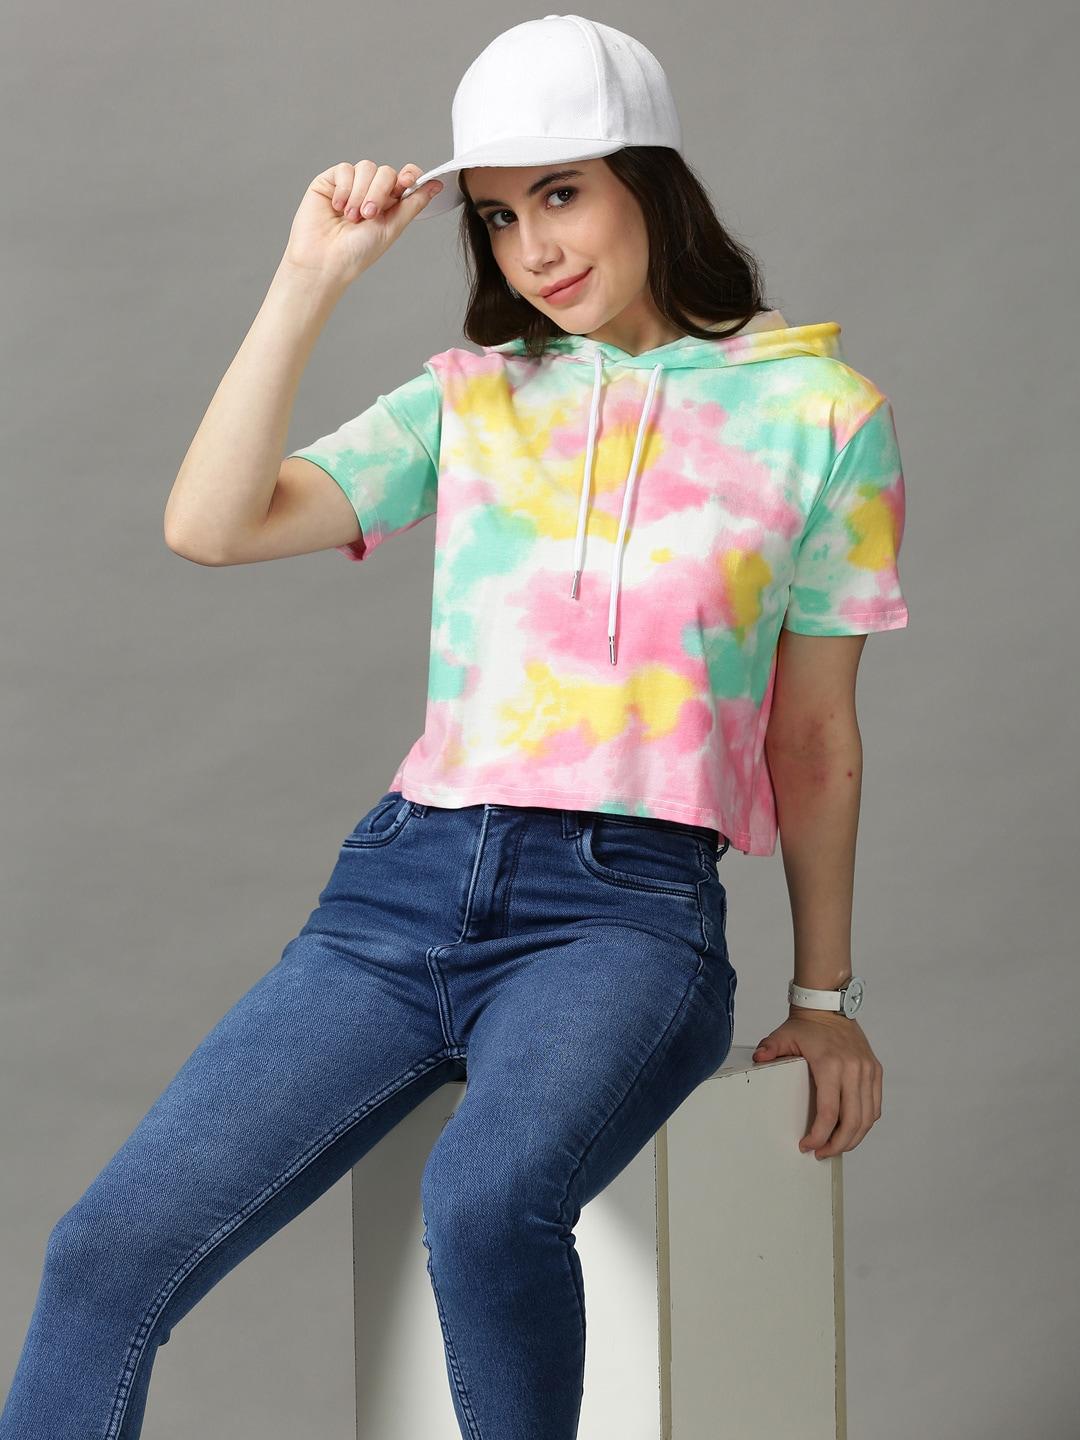 showoff-pink-&-yellow-tie-and-dye-crop-top